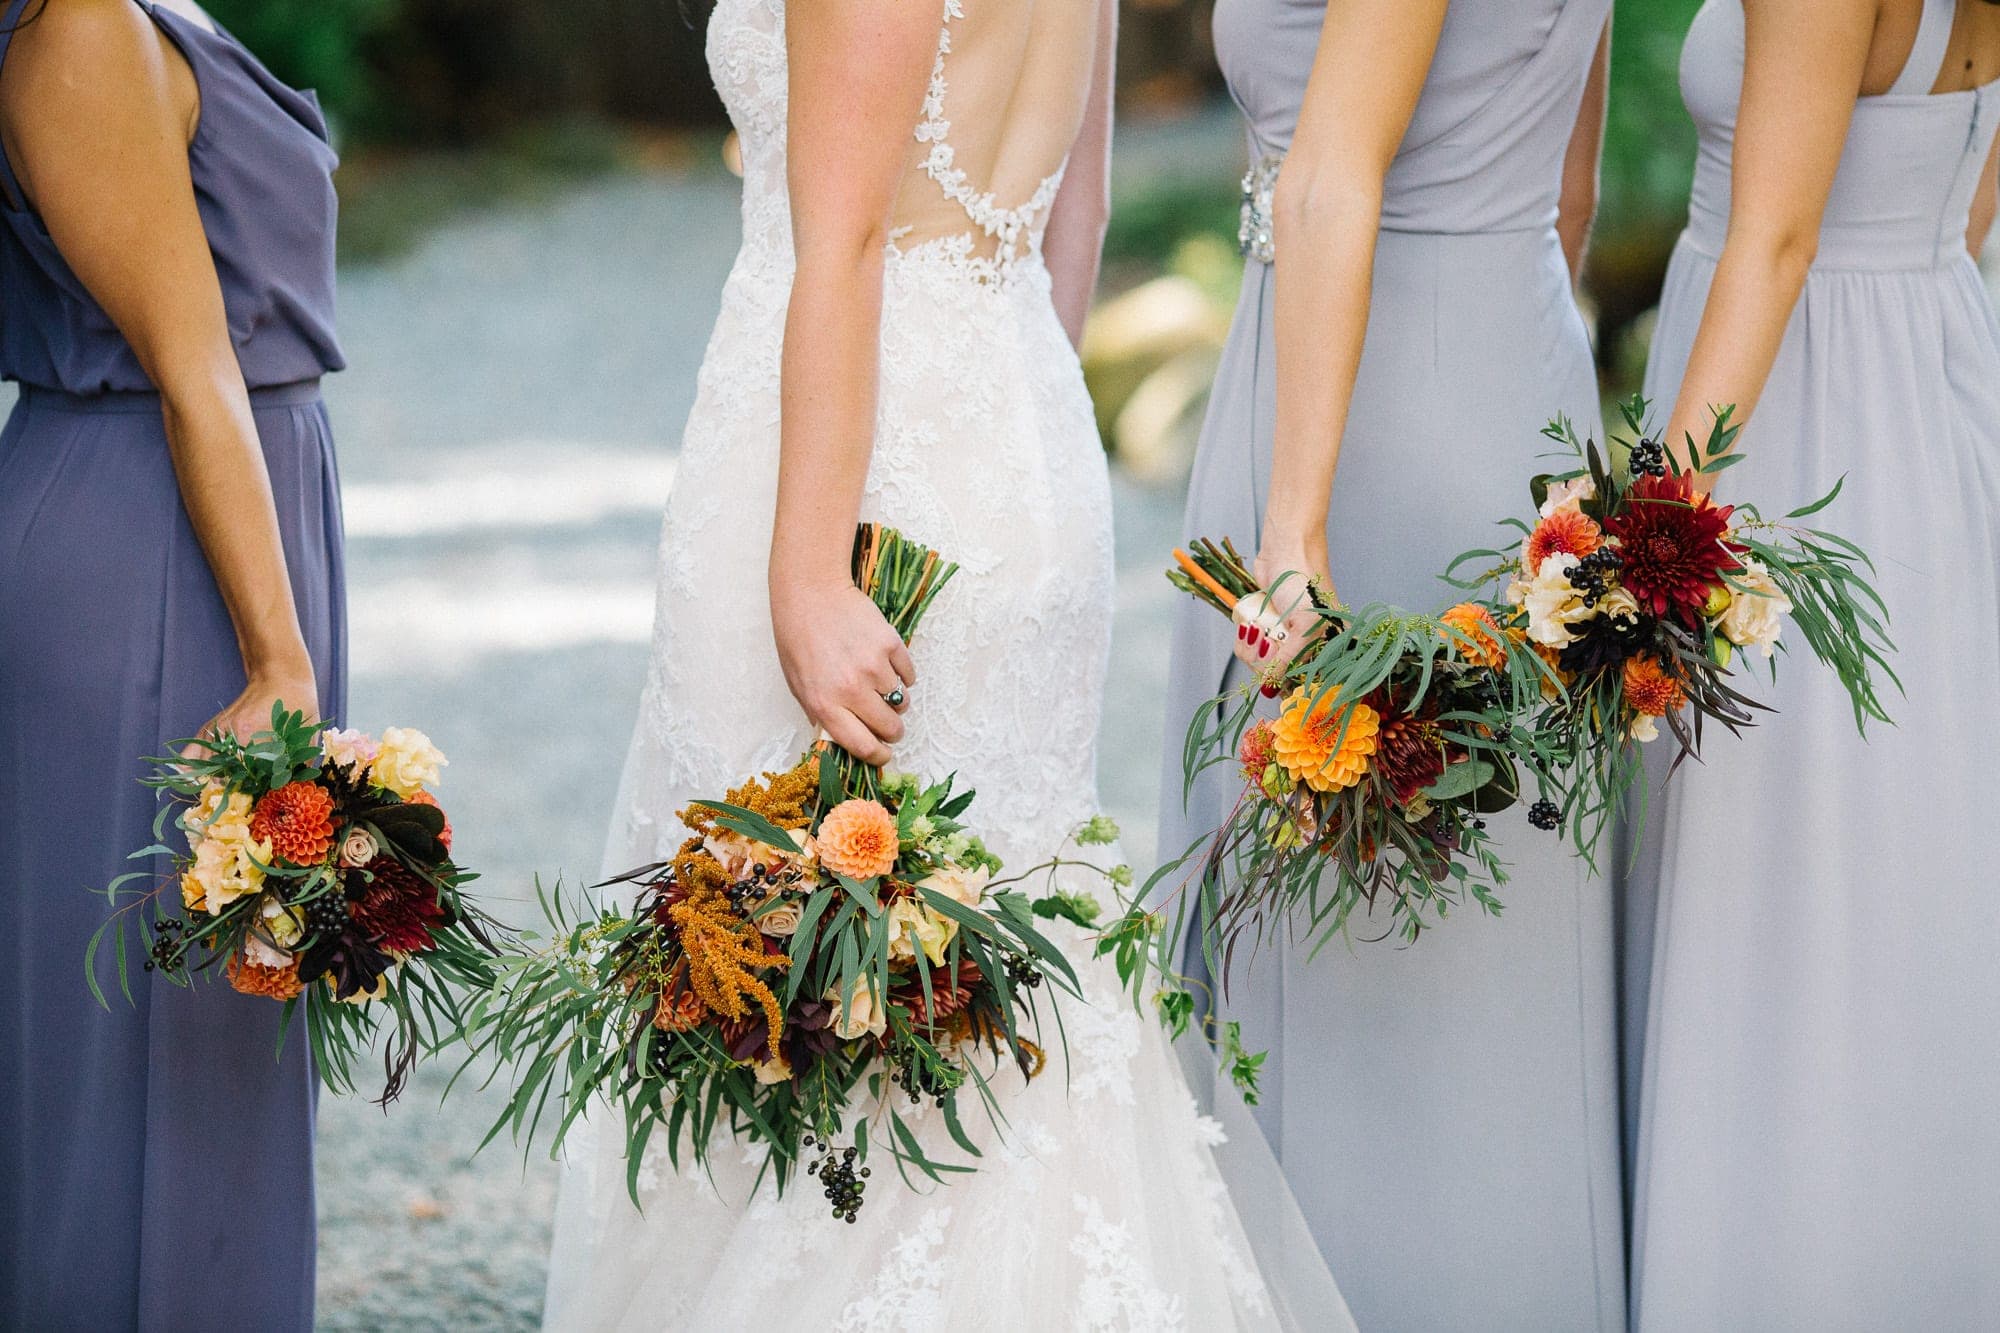 rustic wedding bouquet and bridesmaids bouquets.